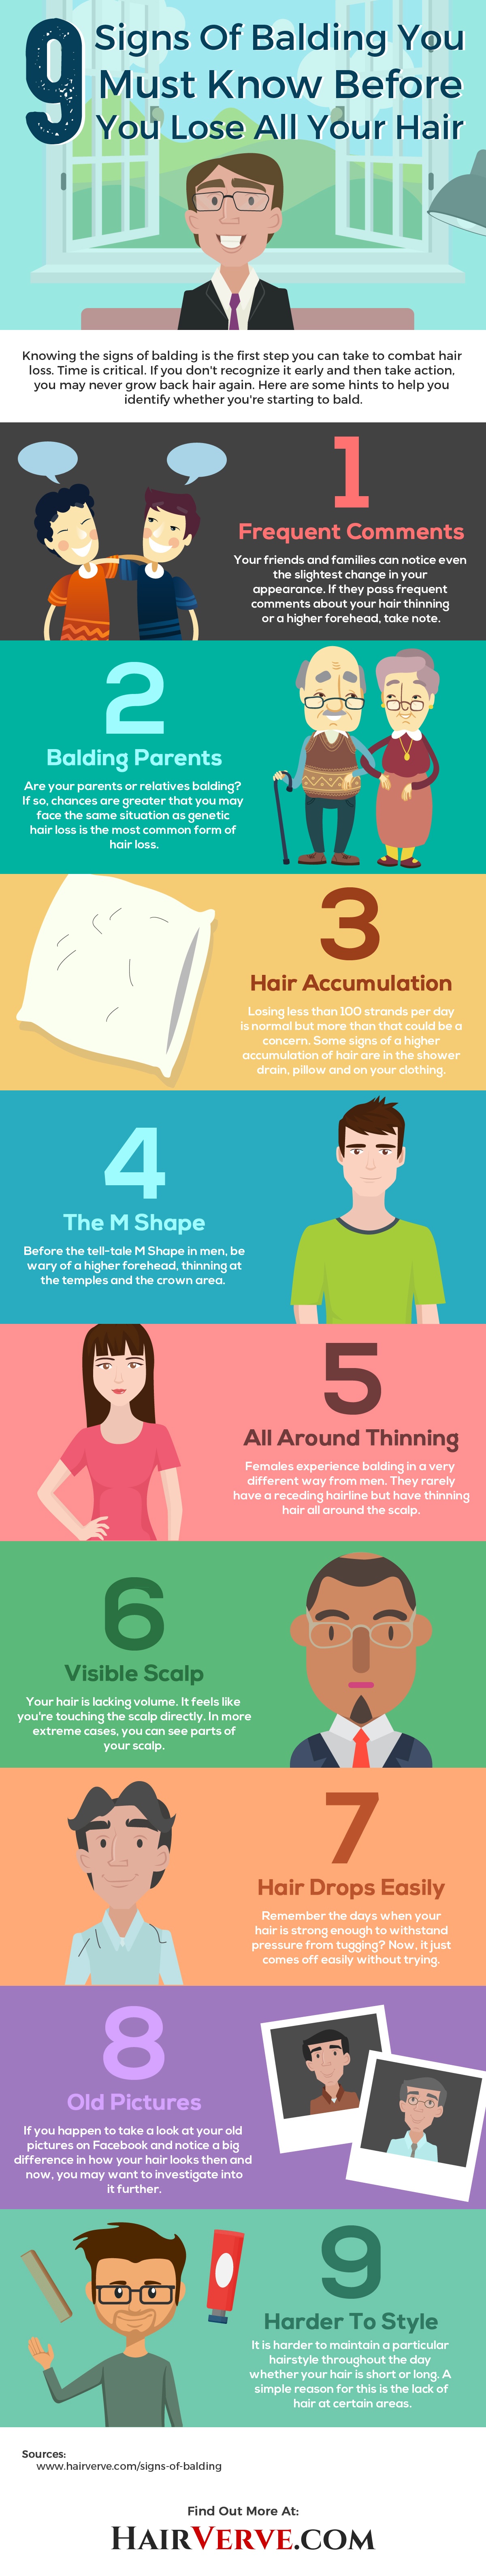 signs-of-balding-infographic (1)